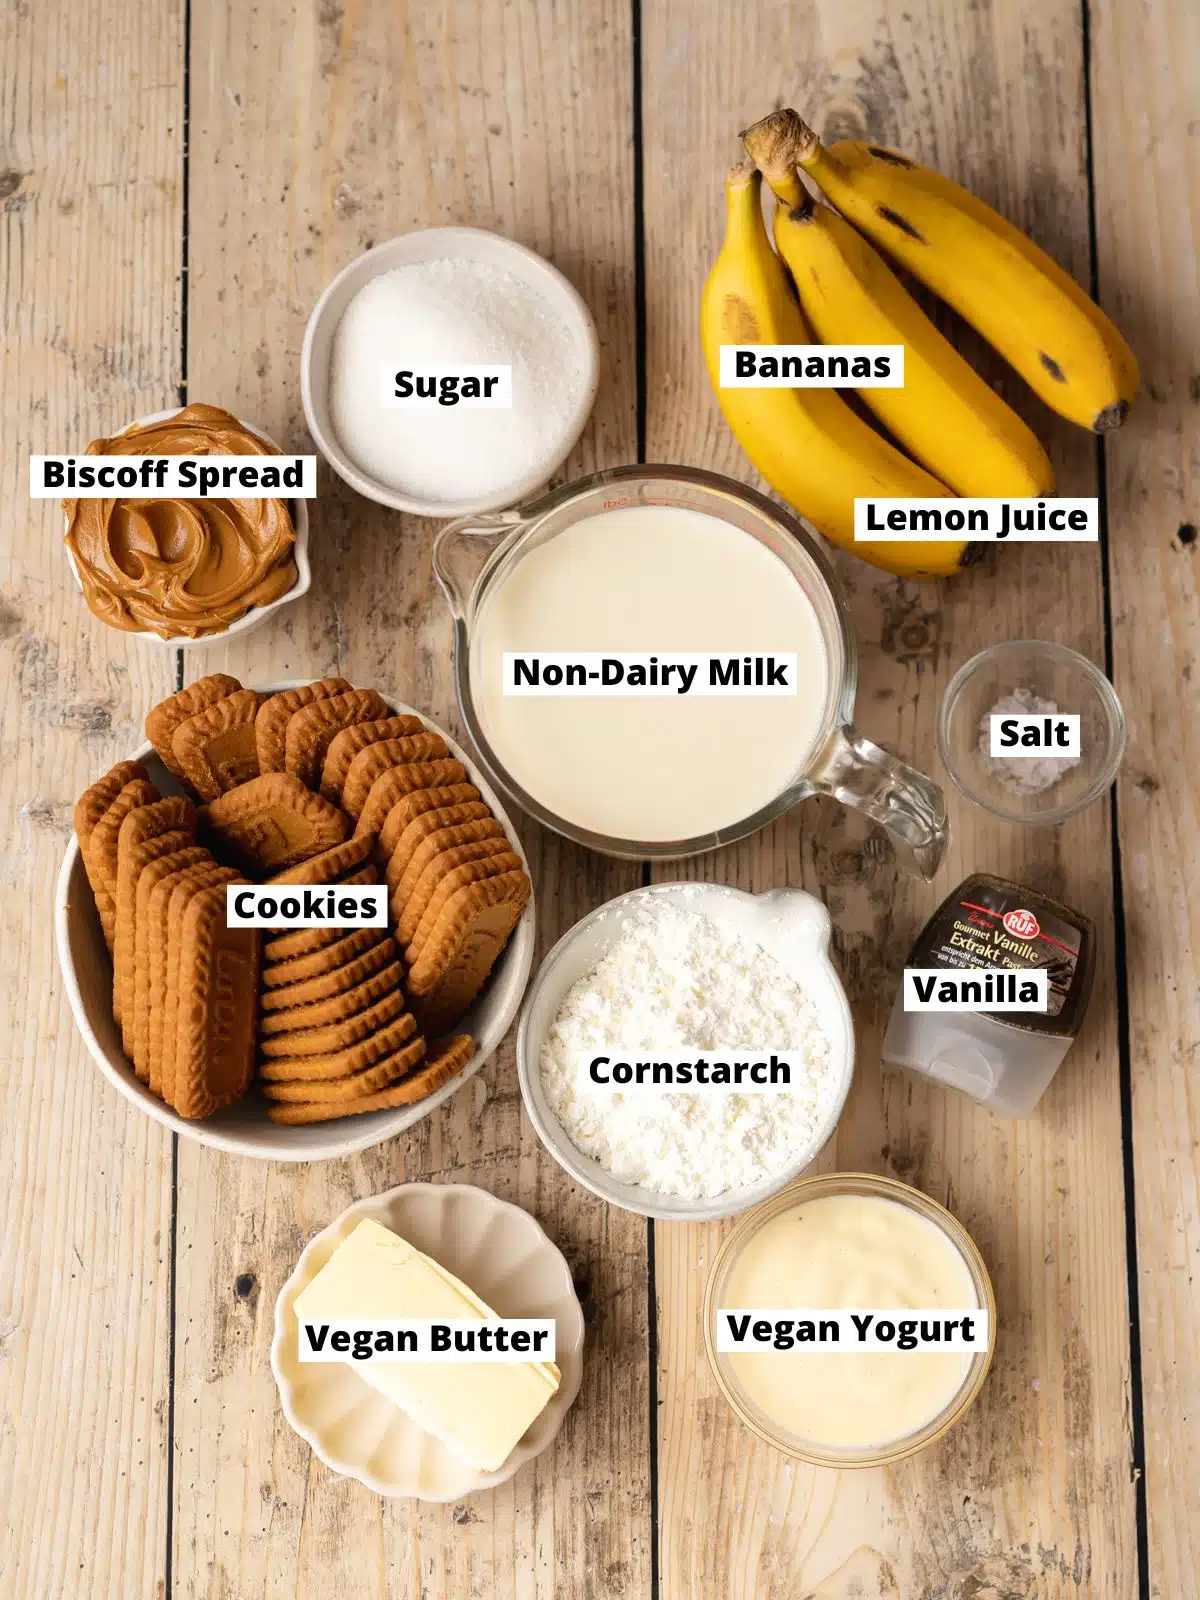 Ingredients needed to make vegan banana cream pie measured out into bowls on a wooden table.